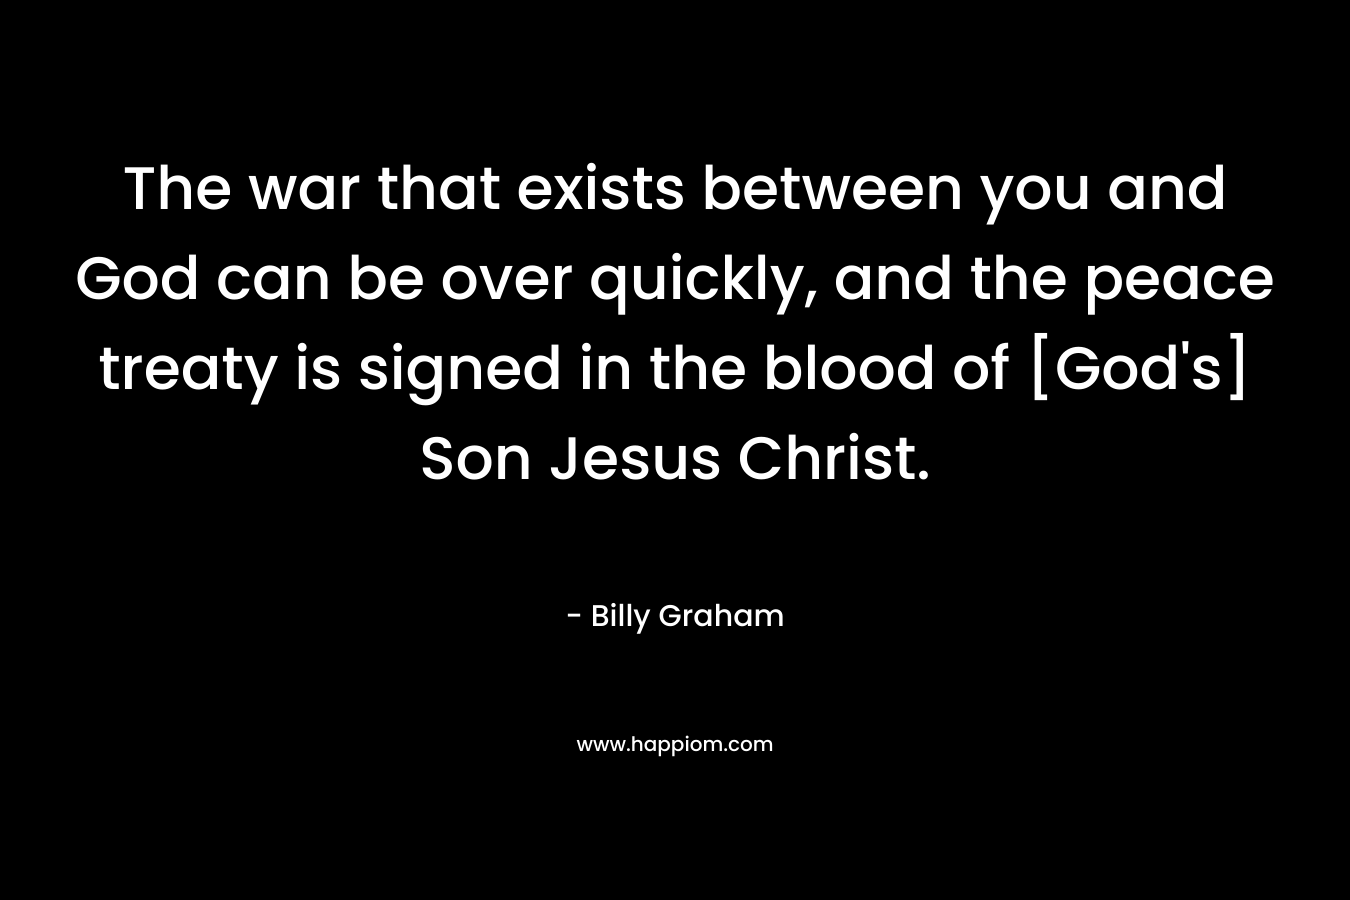 The war that exists between you and God can be over quickly, and the peace treaty is signed in the blood of [God’s] Son Jesus Christ. – Billy Graham